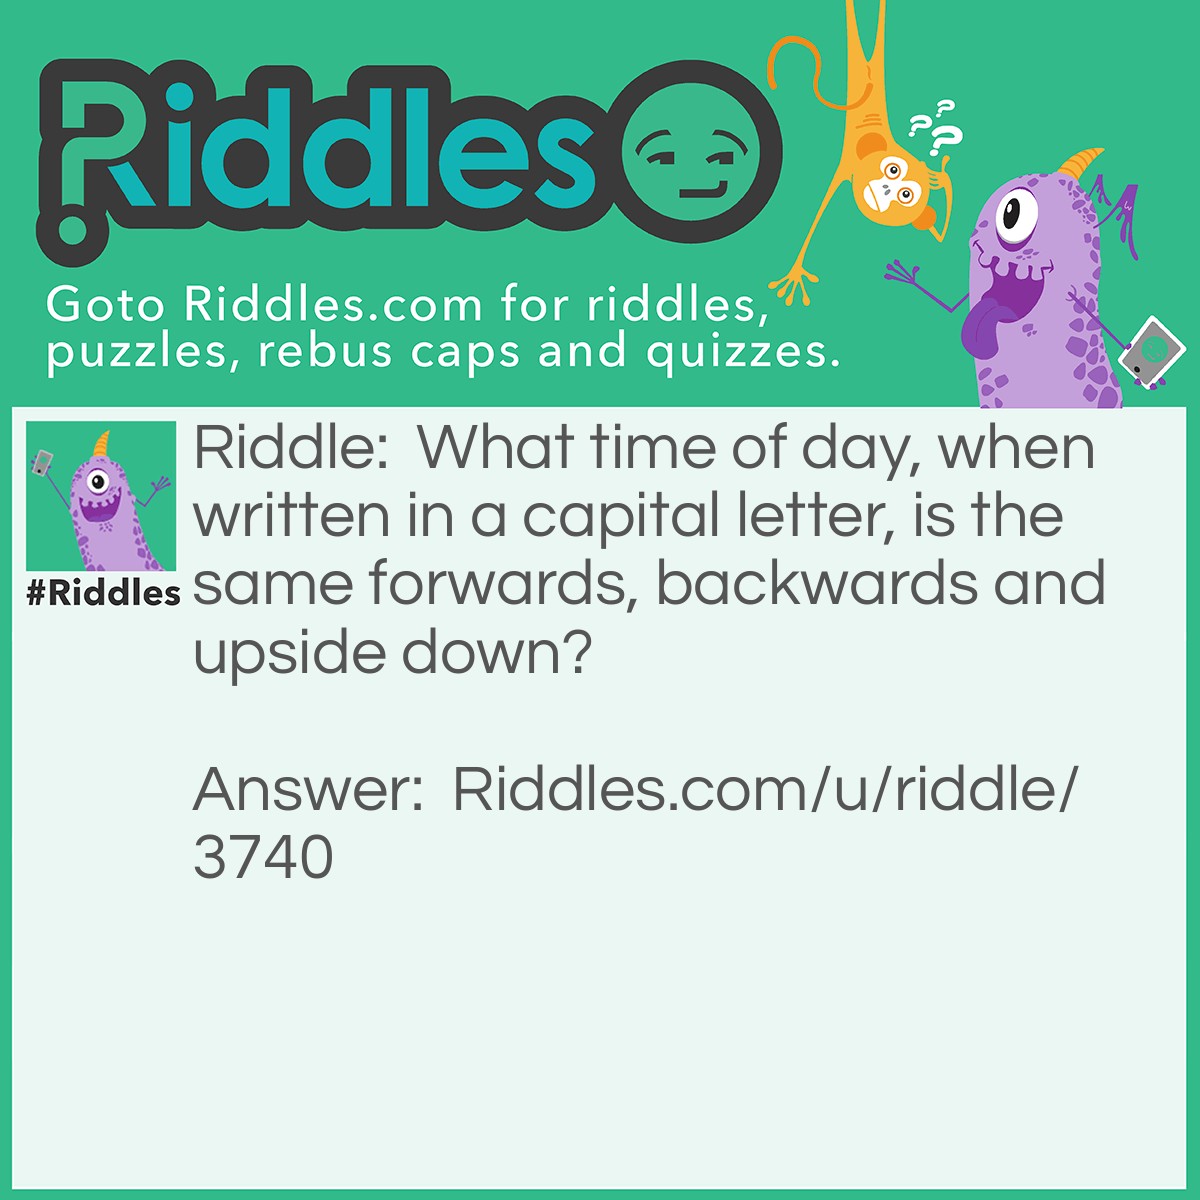 Riddle: What time of day, when written in a capital letter, is the same forwards, backwards and upside down? Answer: NOON.